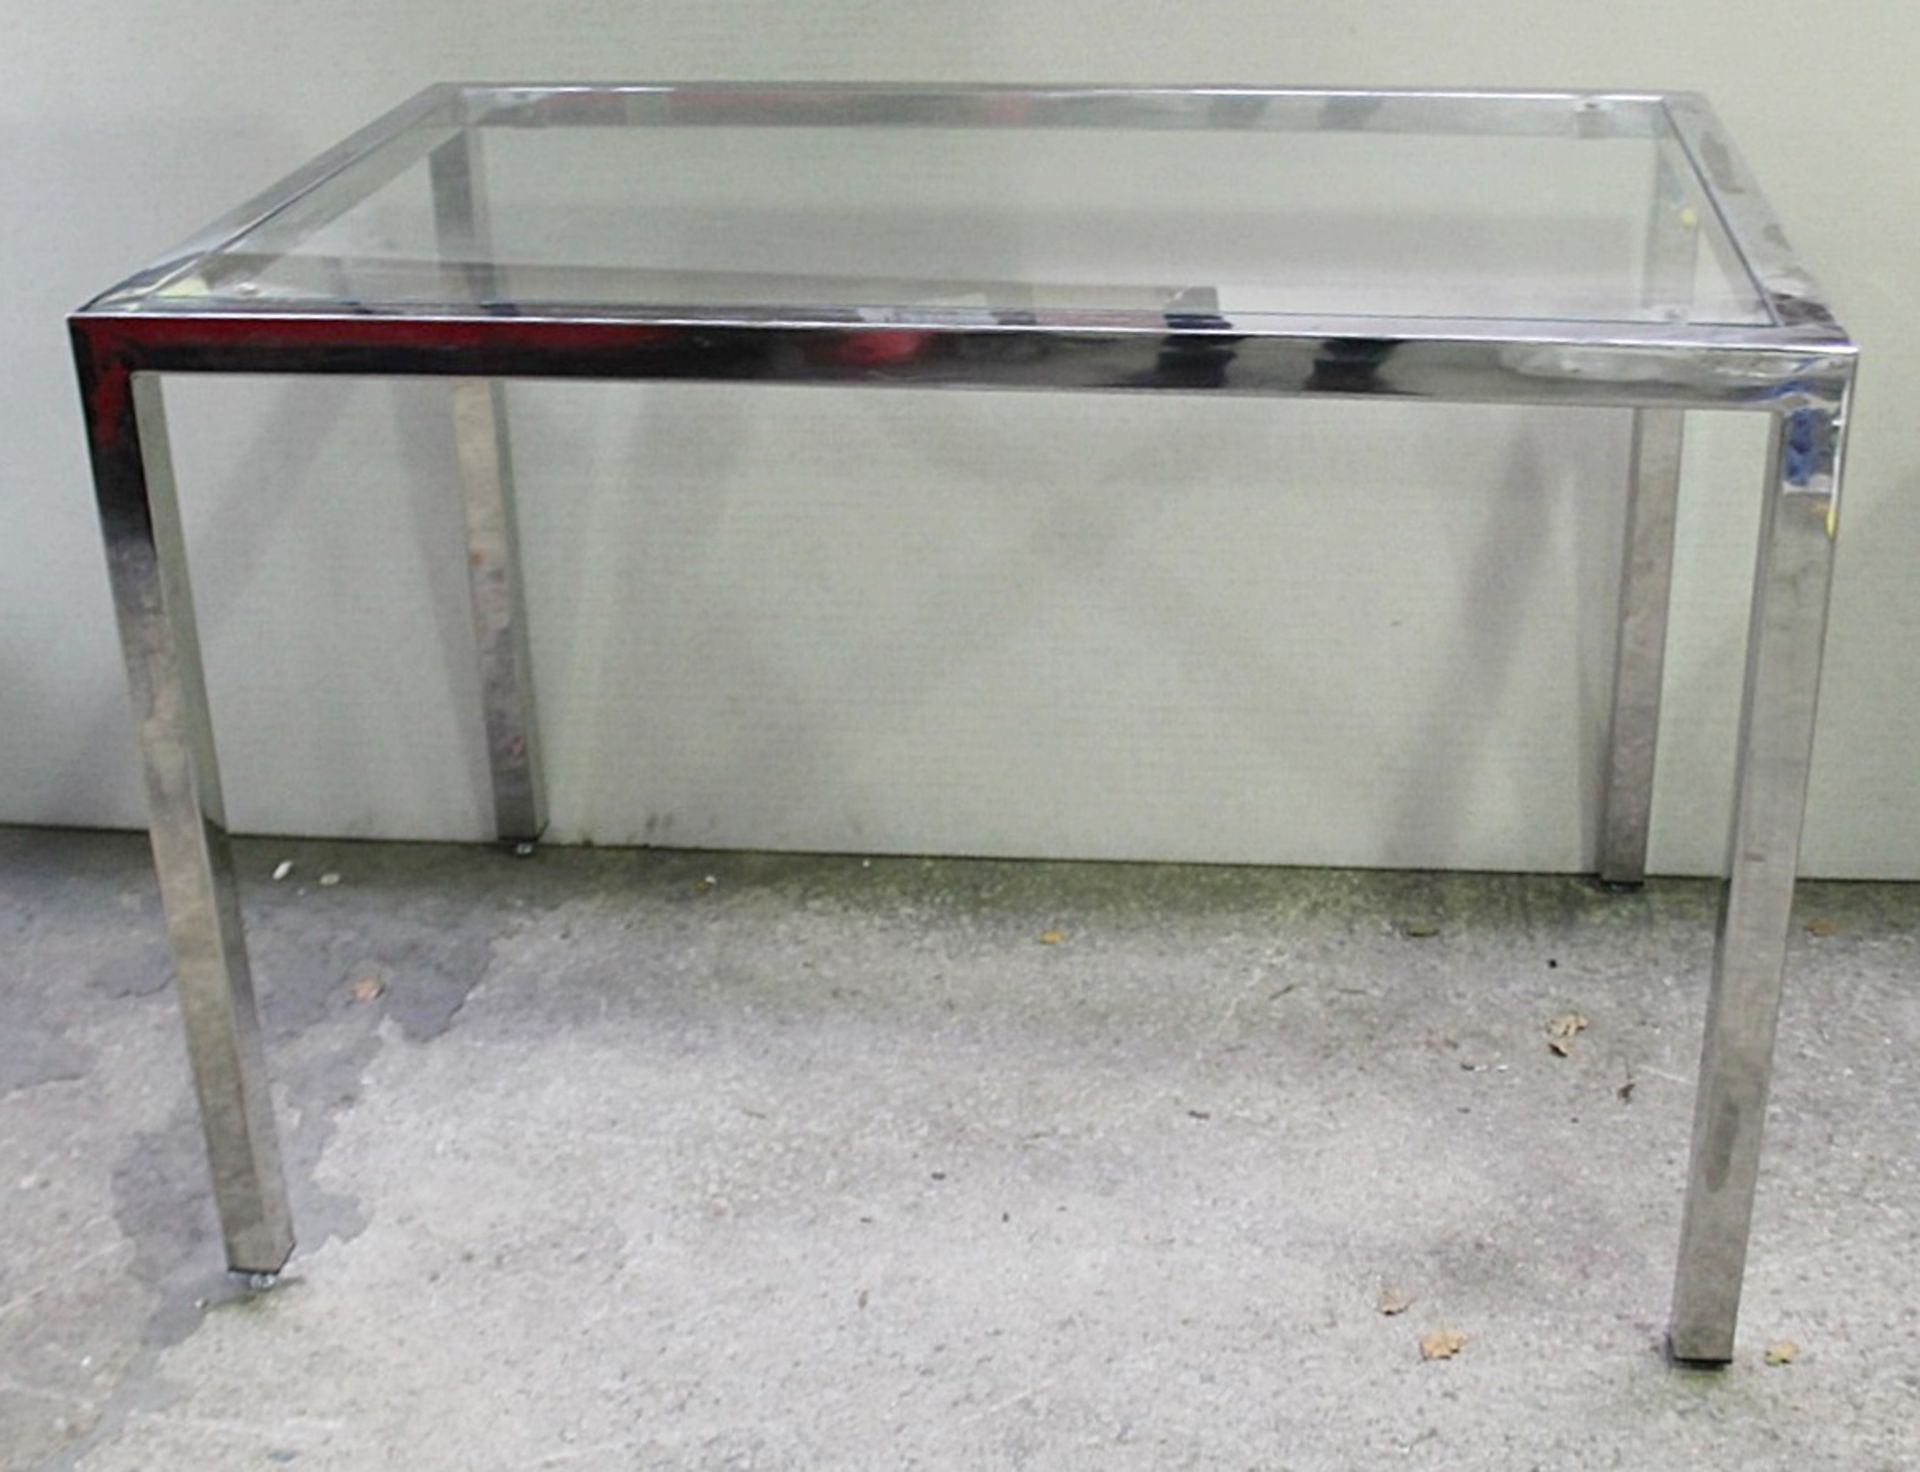 1 x Large Display Table In Glass And Chrome - Dimensions: H91 x W135 x D90cm - Ex-Showroom Piece - - Image 3 of 6